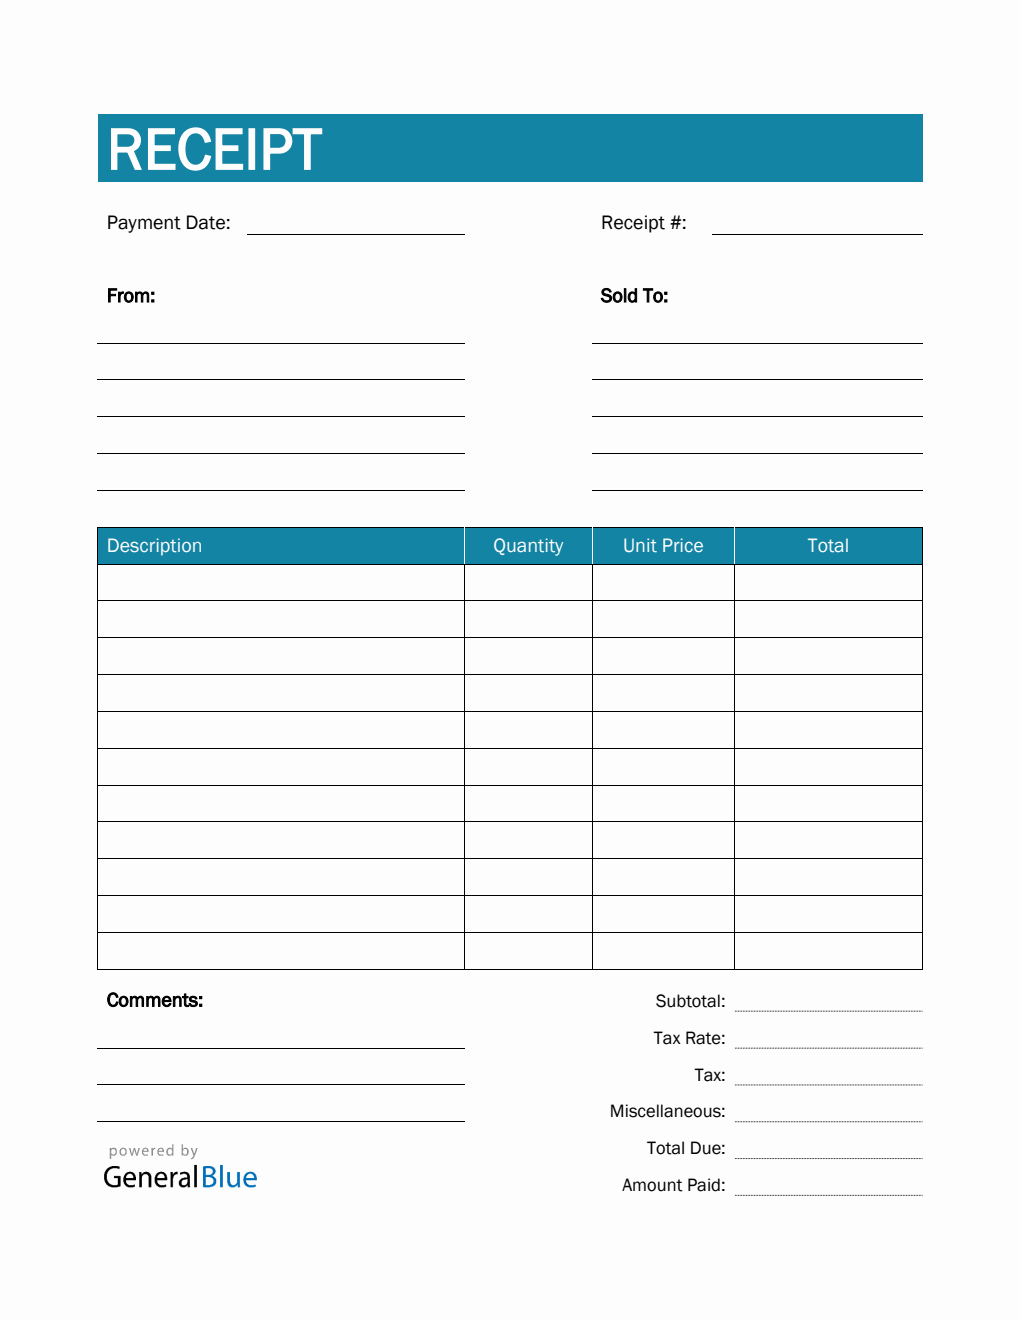 Receipt Template in PDF (Colorful)